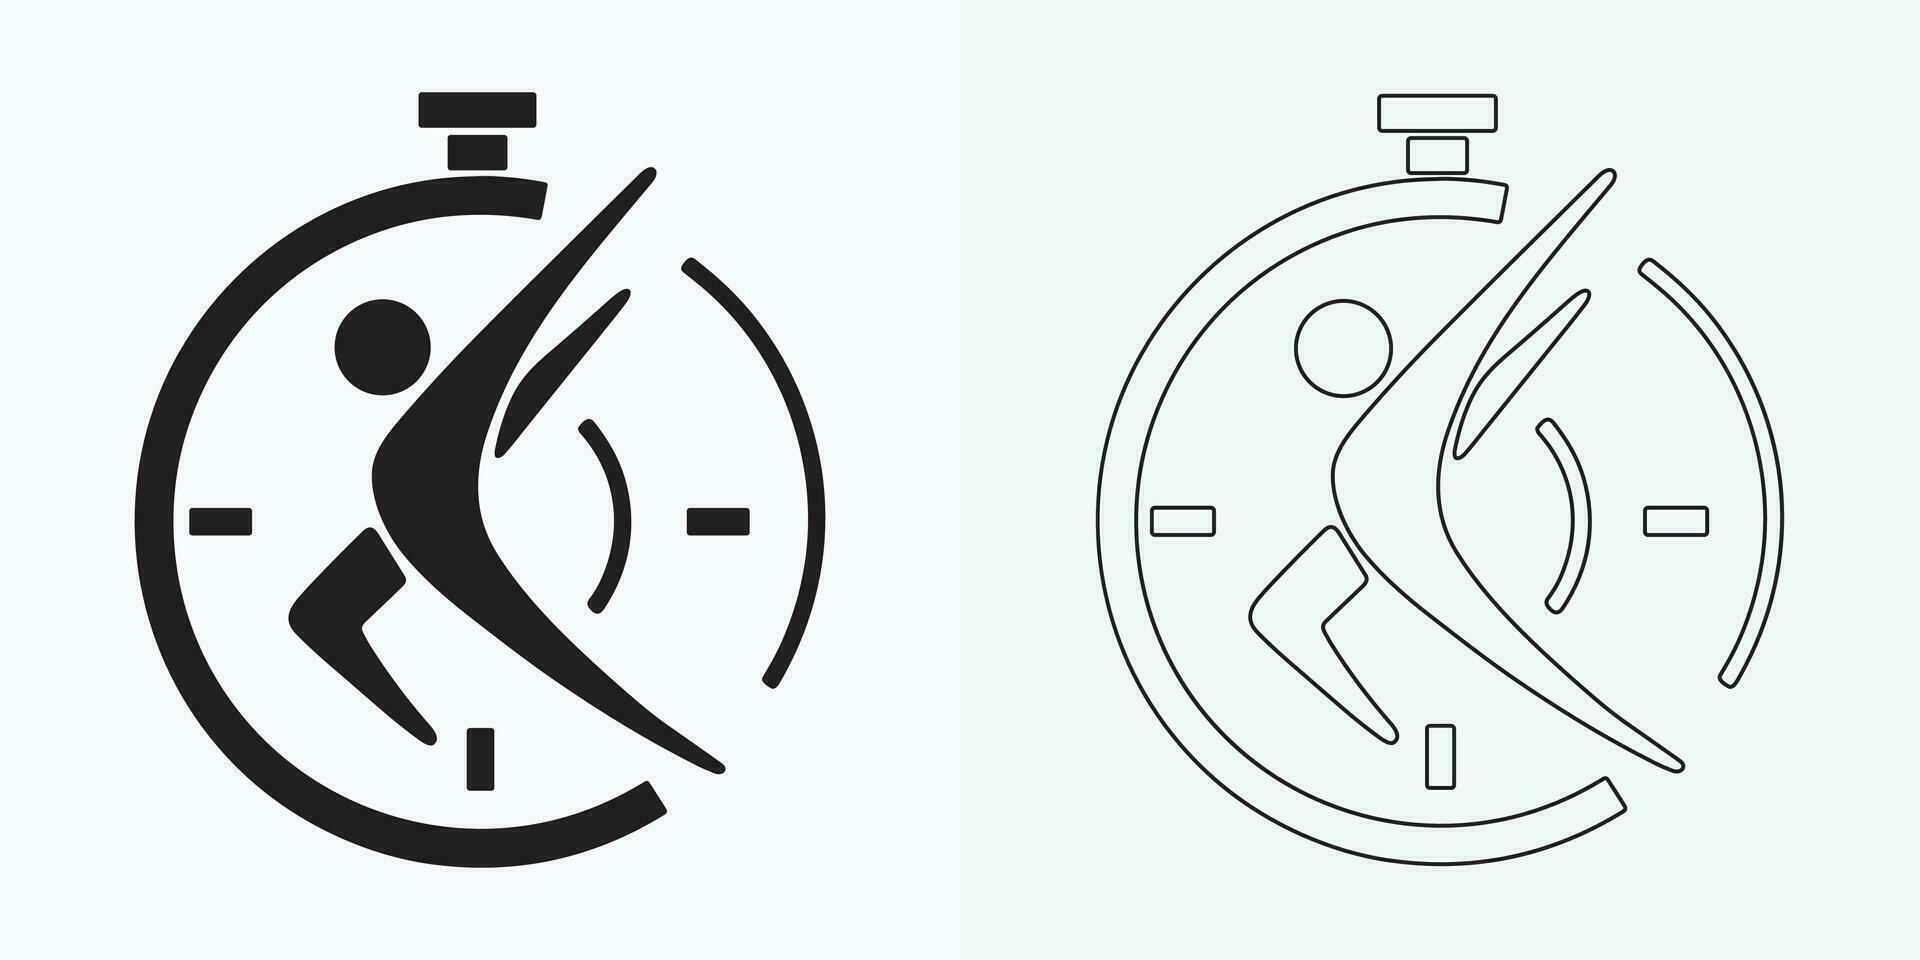 Clock icon illustration in flat style. Watch face vector illustration on isolated background. Time alarm sign business concept.